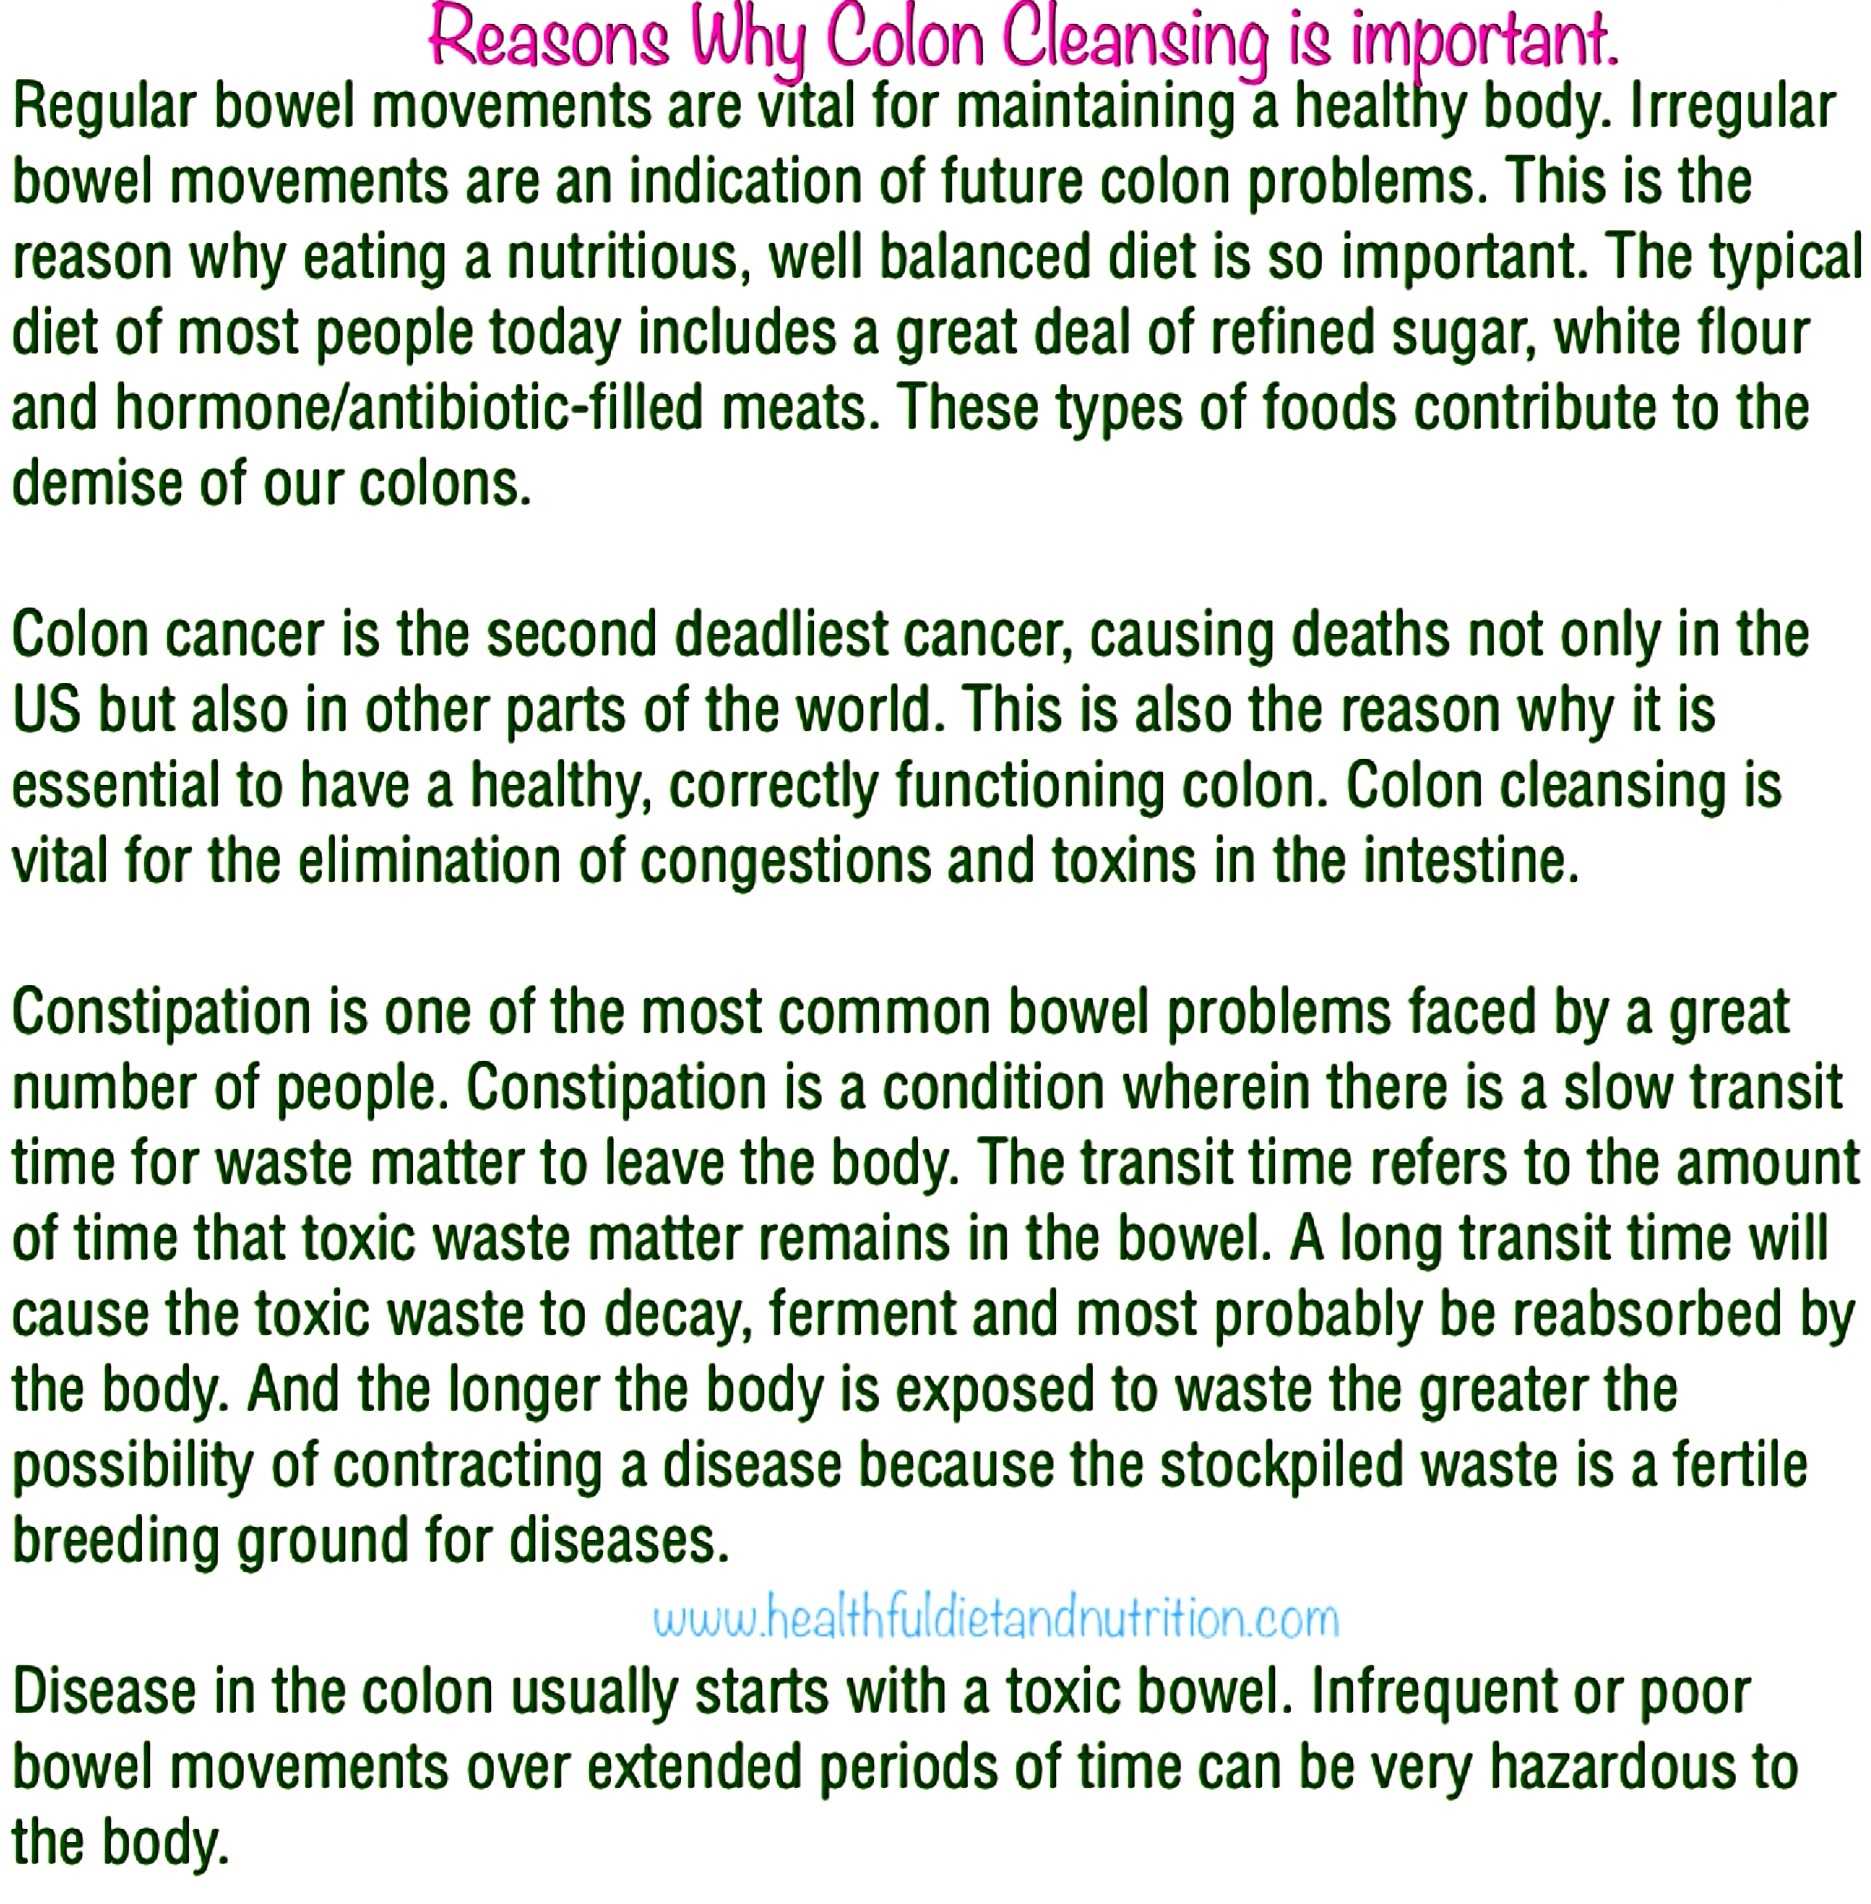 Reasons Why Colon Cleansing Is Important